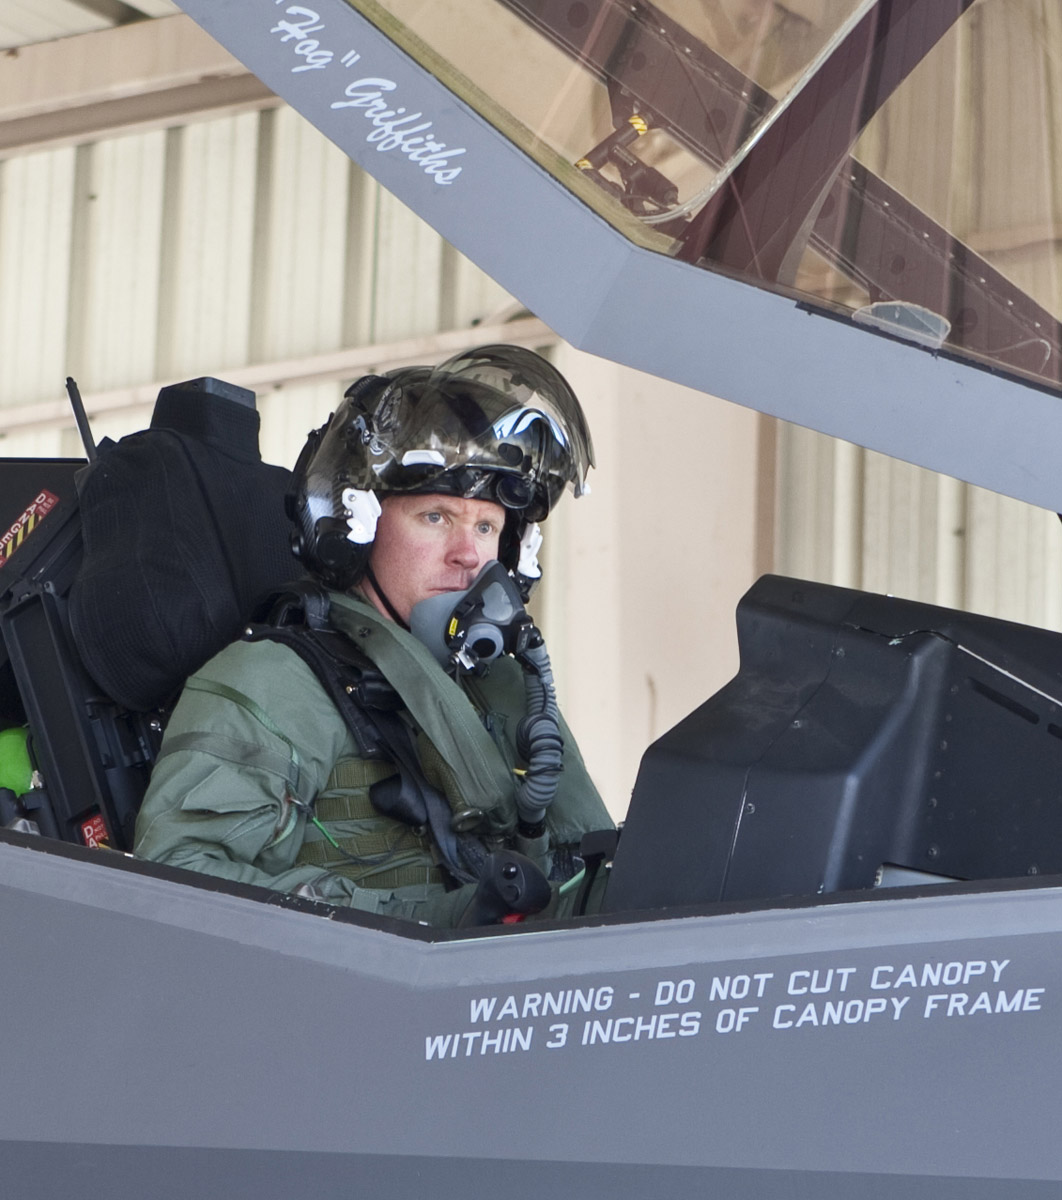 28th person to fly the F-35 was killed in mysterious crash – Alert 5